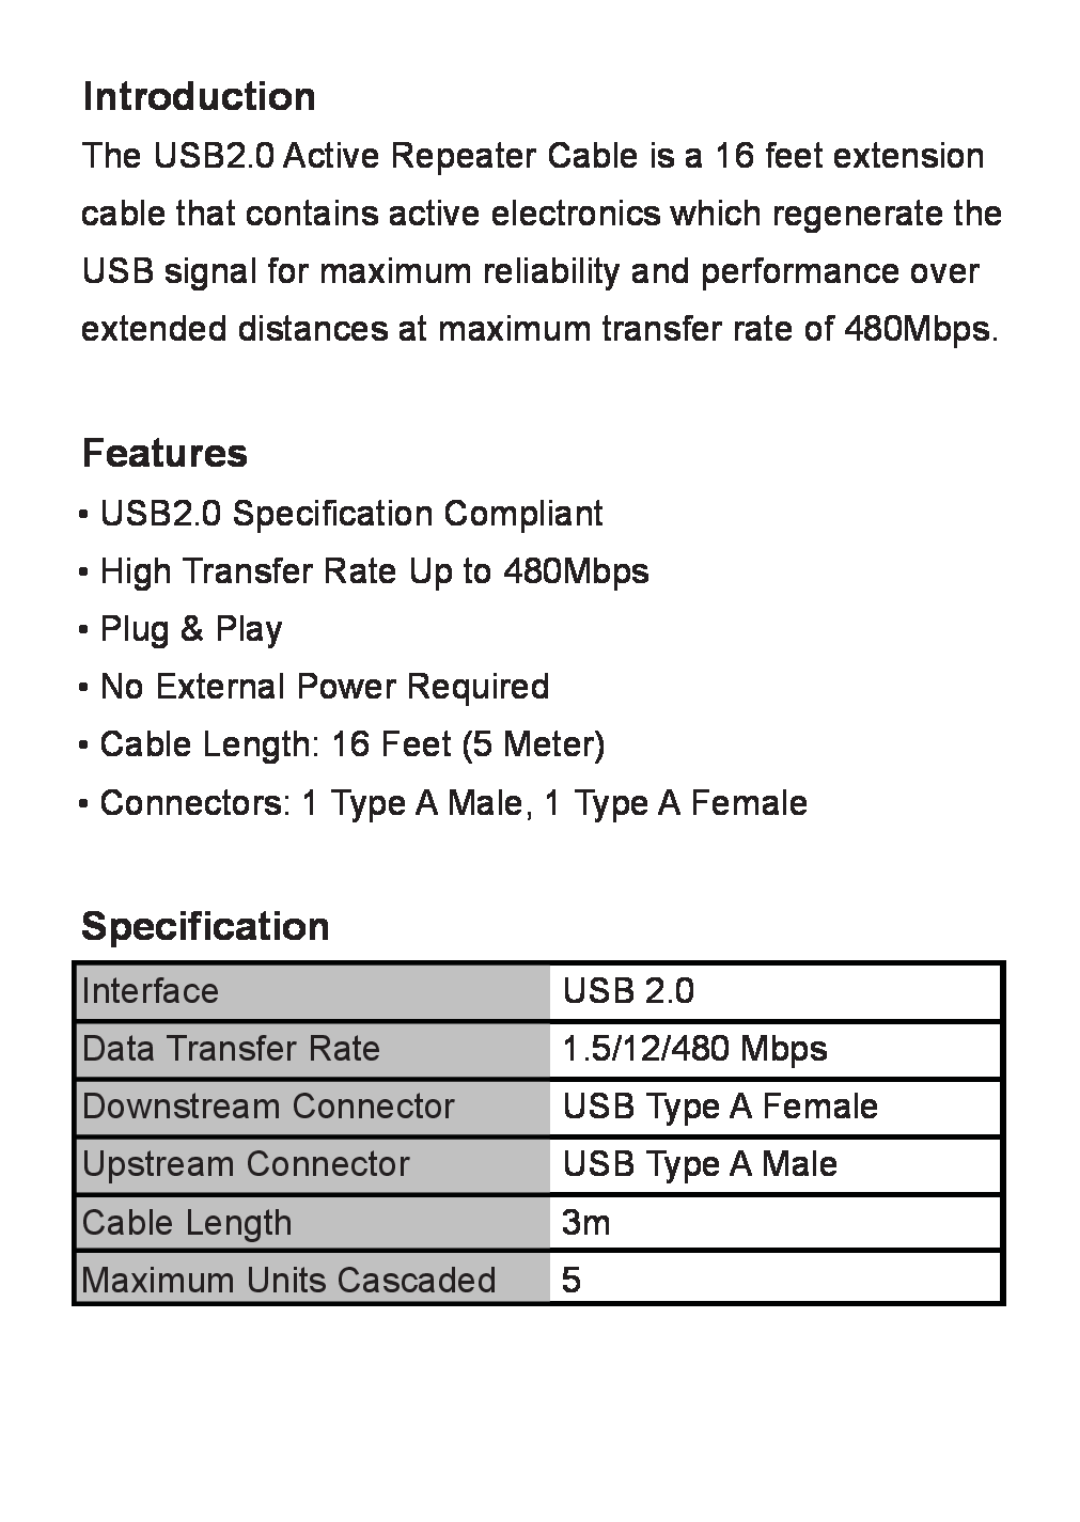 Vantec CB-USBARC user manual Introduction, Features, Specification 